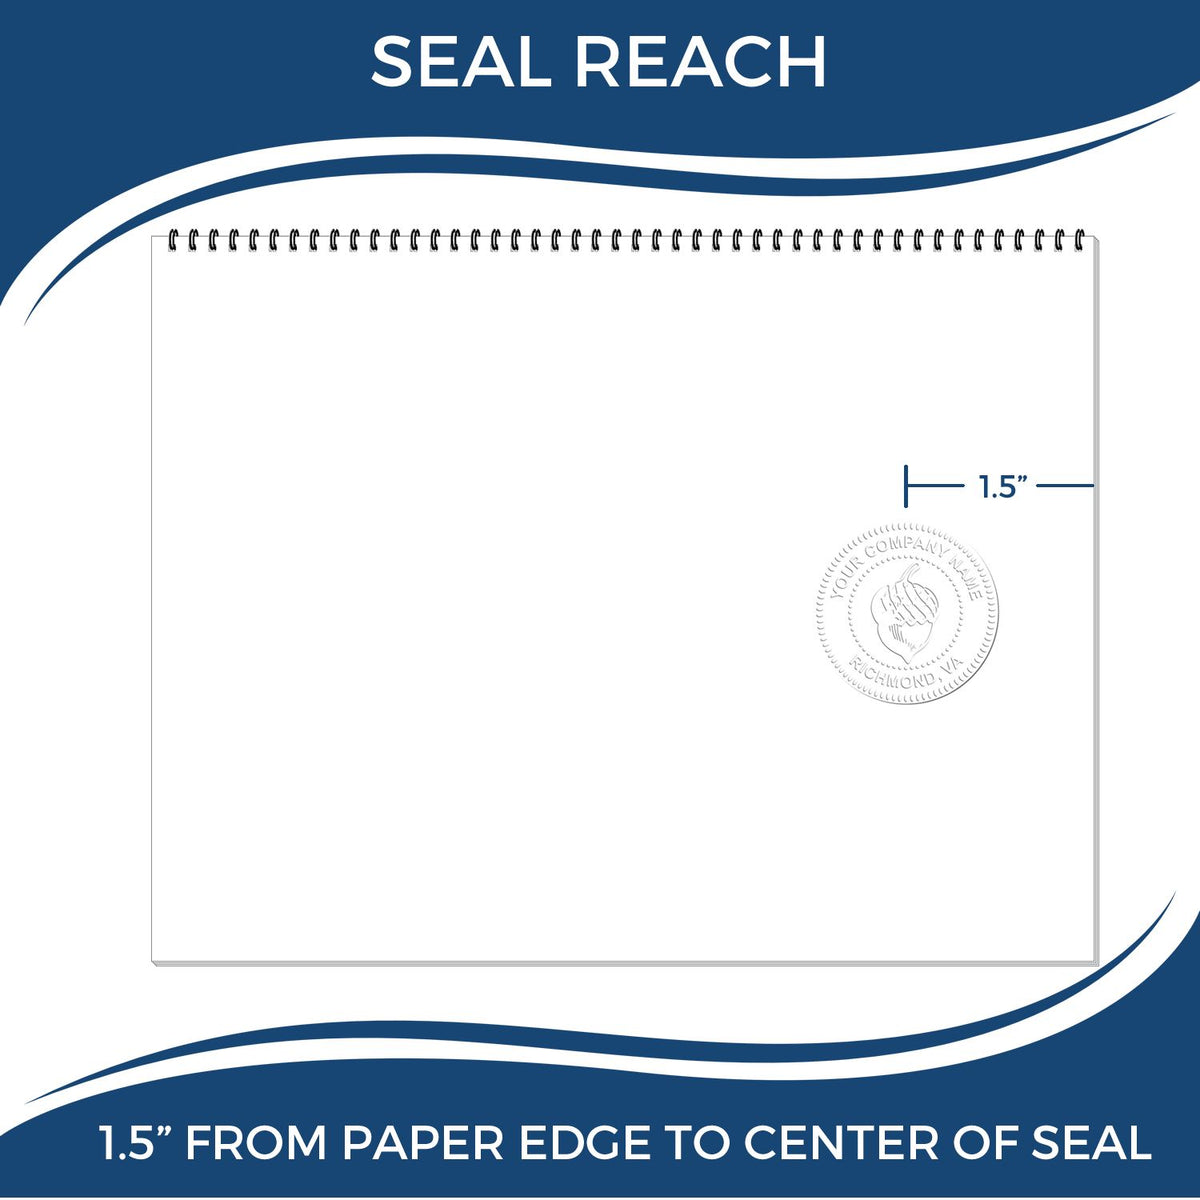 An infographic showing the seal reach which is represented by a ruler and a miniature seal image of the Soft Pocket Alaska Landscape Architect Embosser